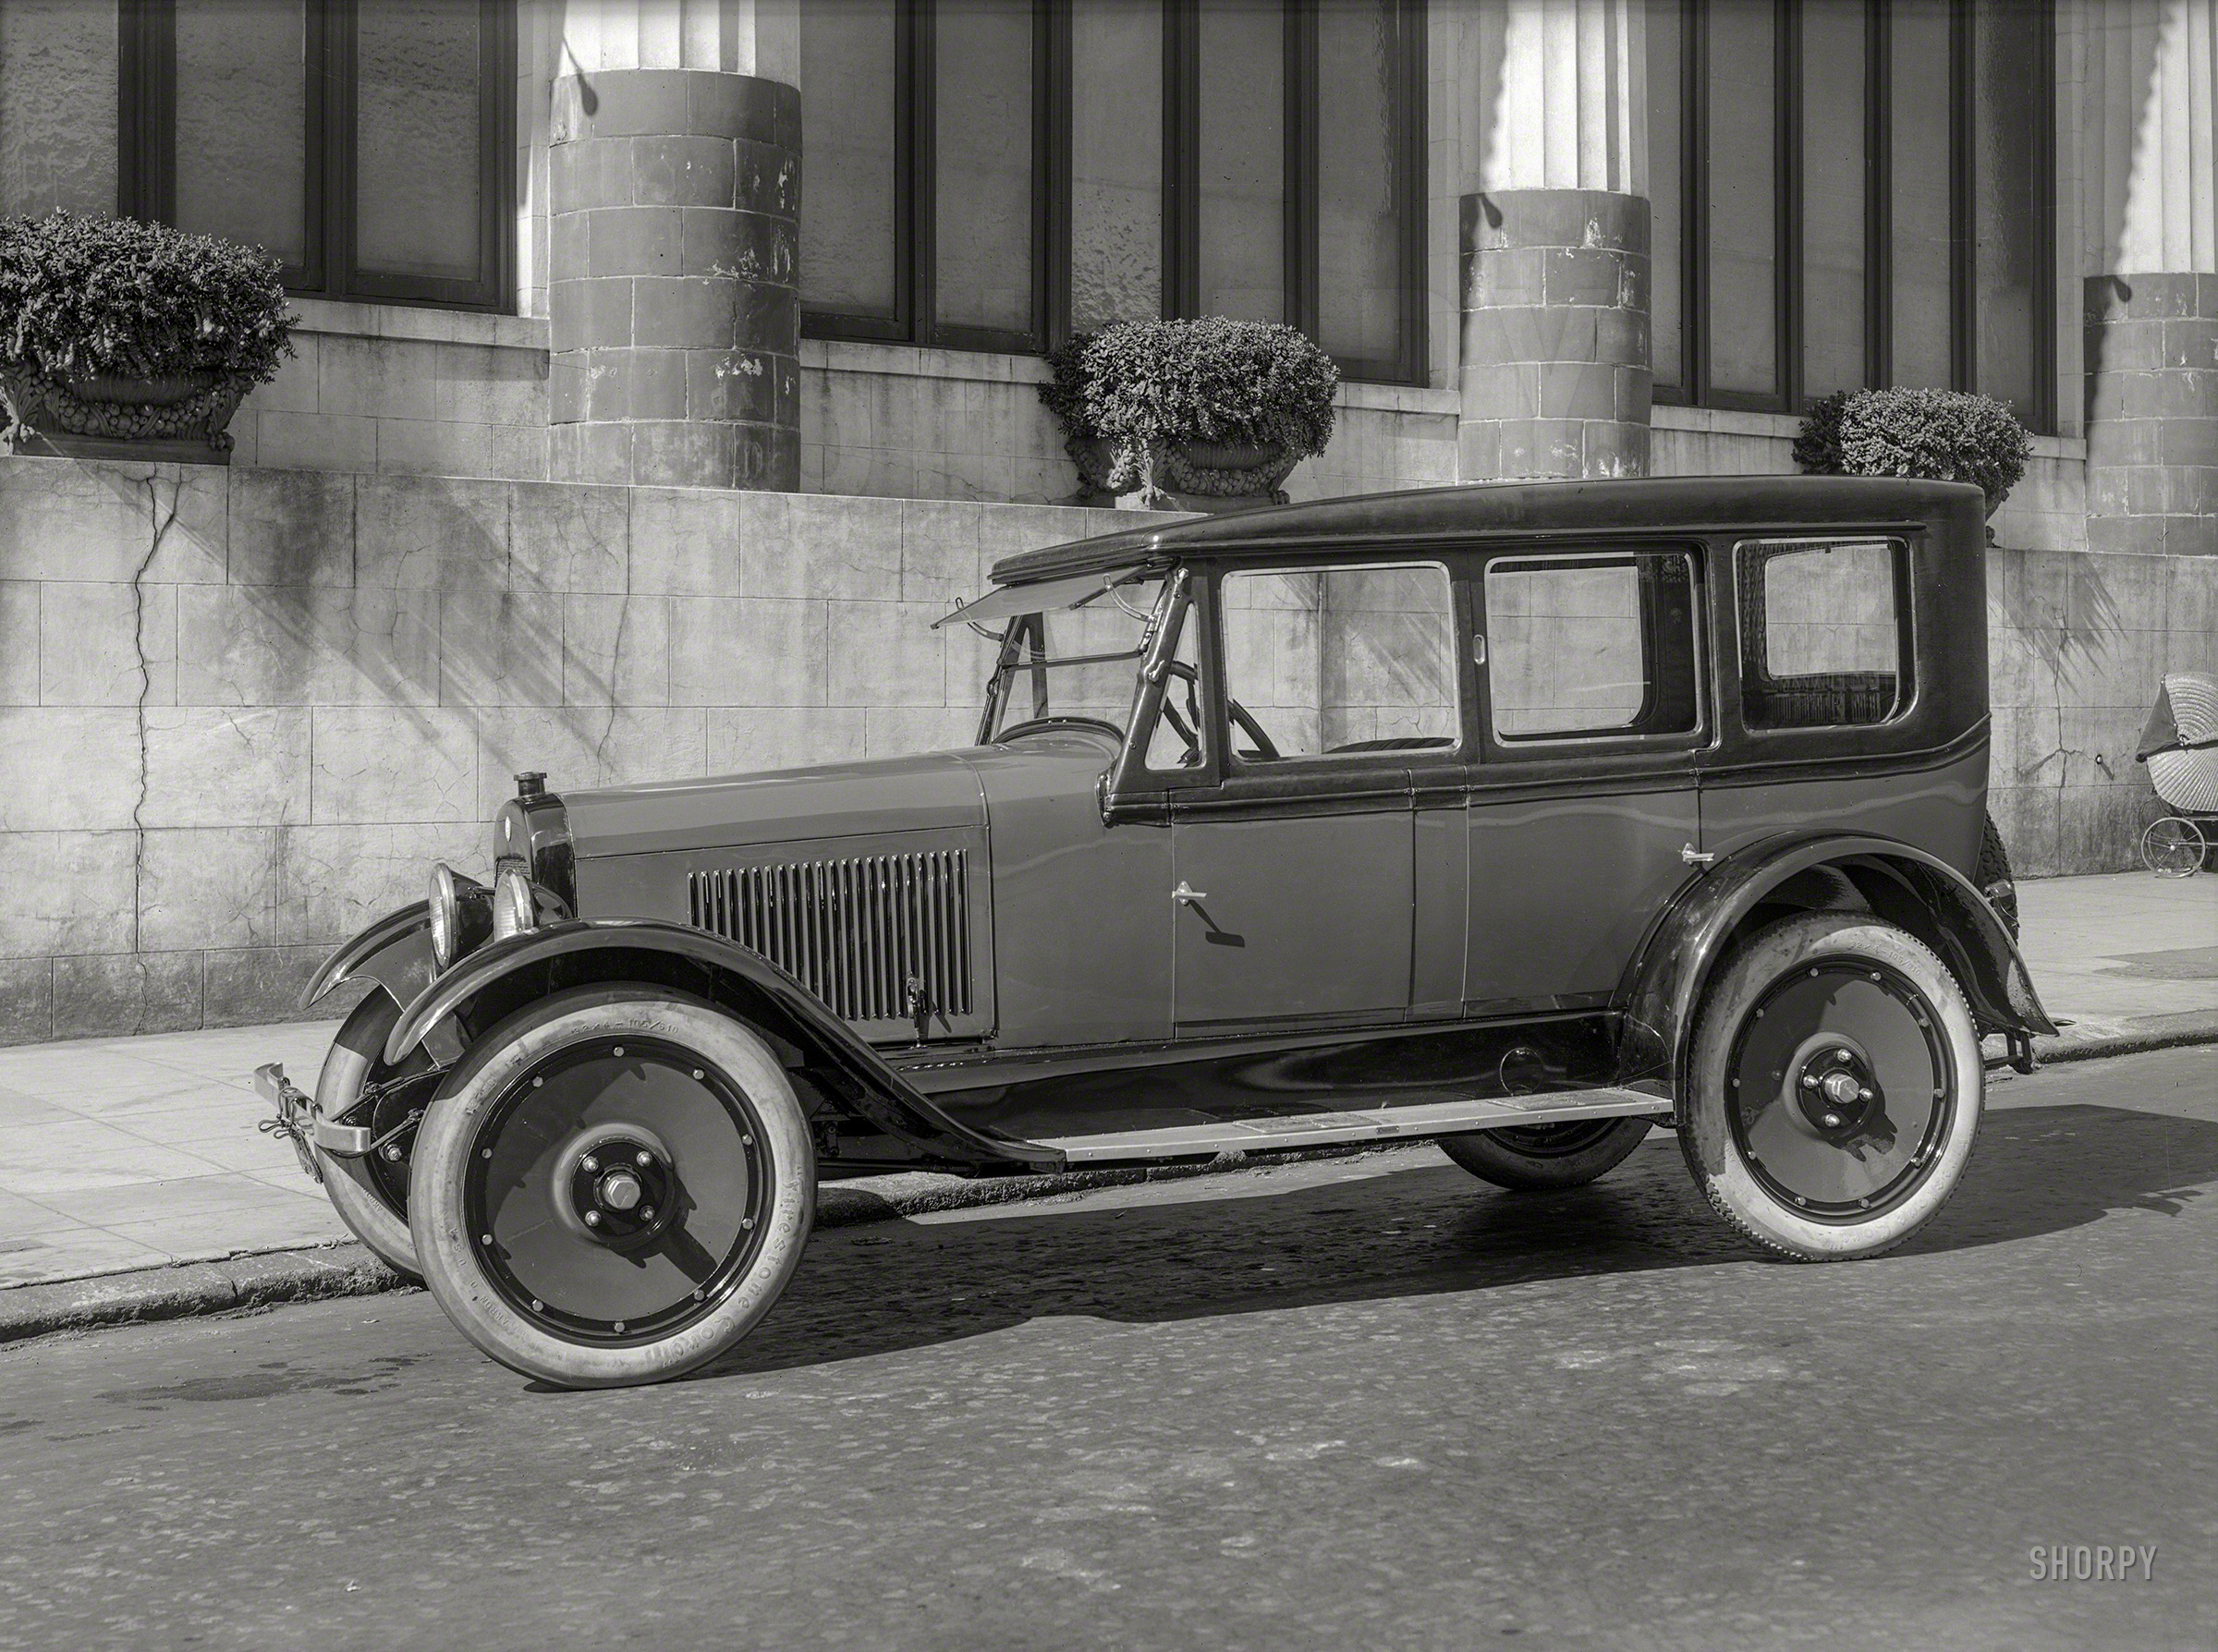 San Francisco circa 1921. "Chalmers touring car at Lurline Baths, Bush side of Bush and Larkin." An open car whose "California top" is fitted with windows on the driver side. 5x7 glass negative by Christopher Helin. View full size.